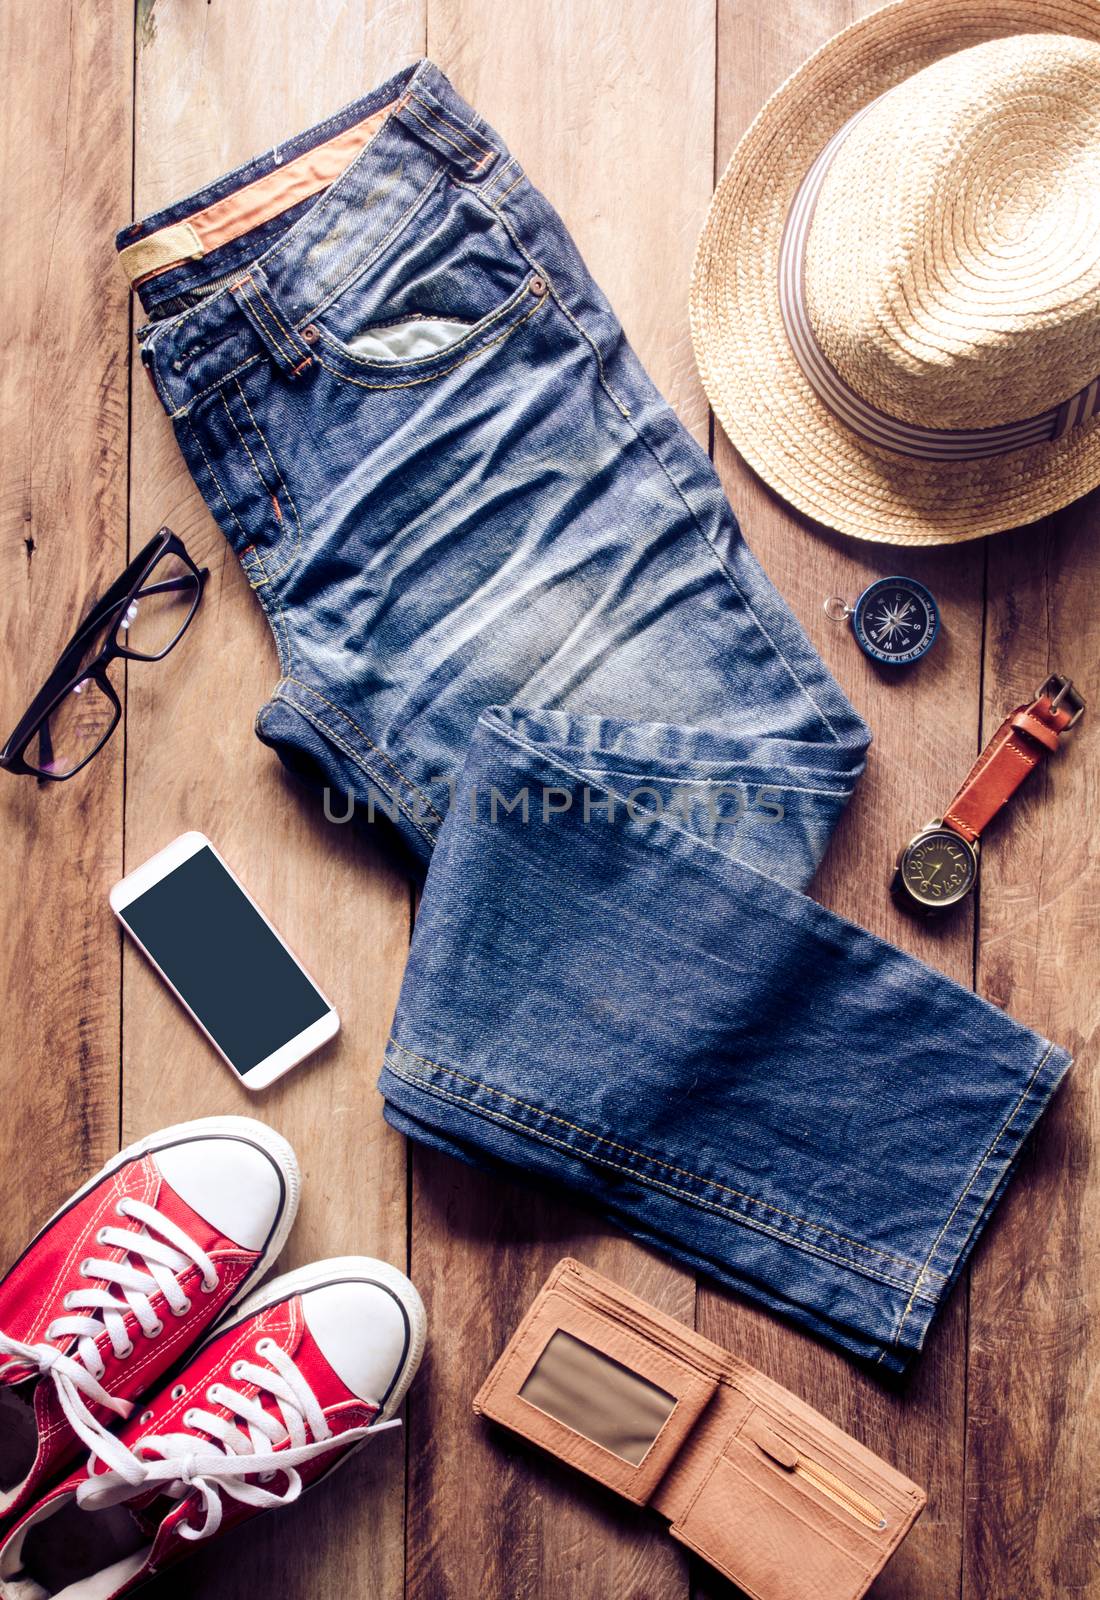 Clothing and accessories for travel on wooden floor - concept li by photobyphotoboy